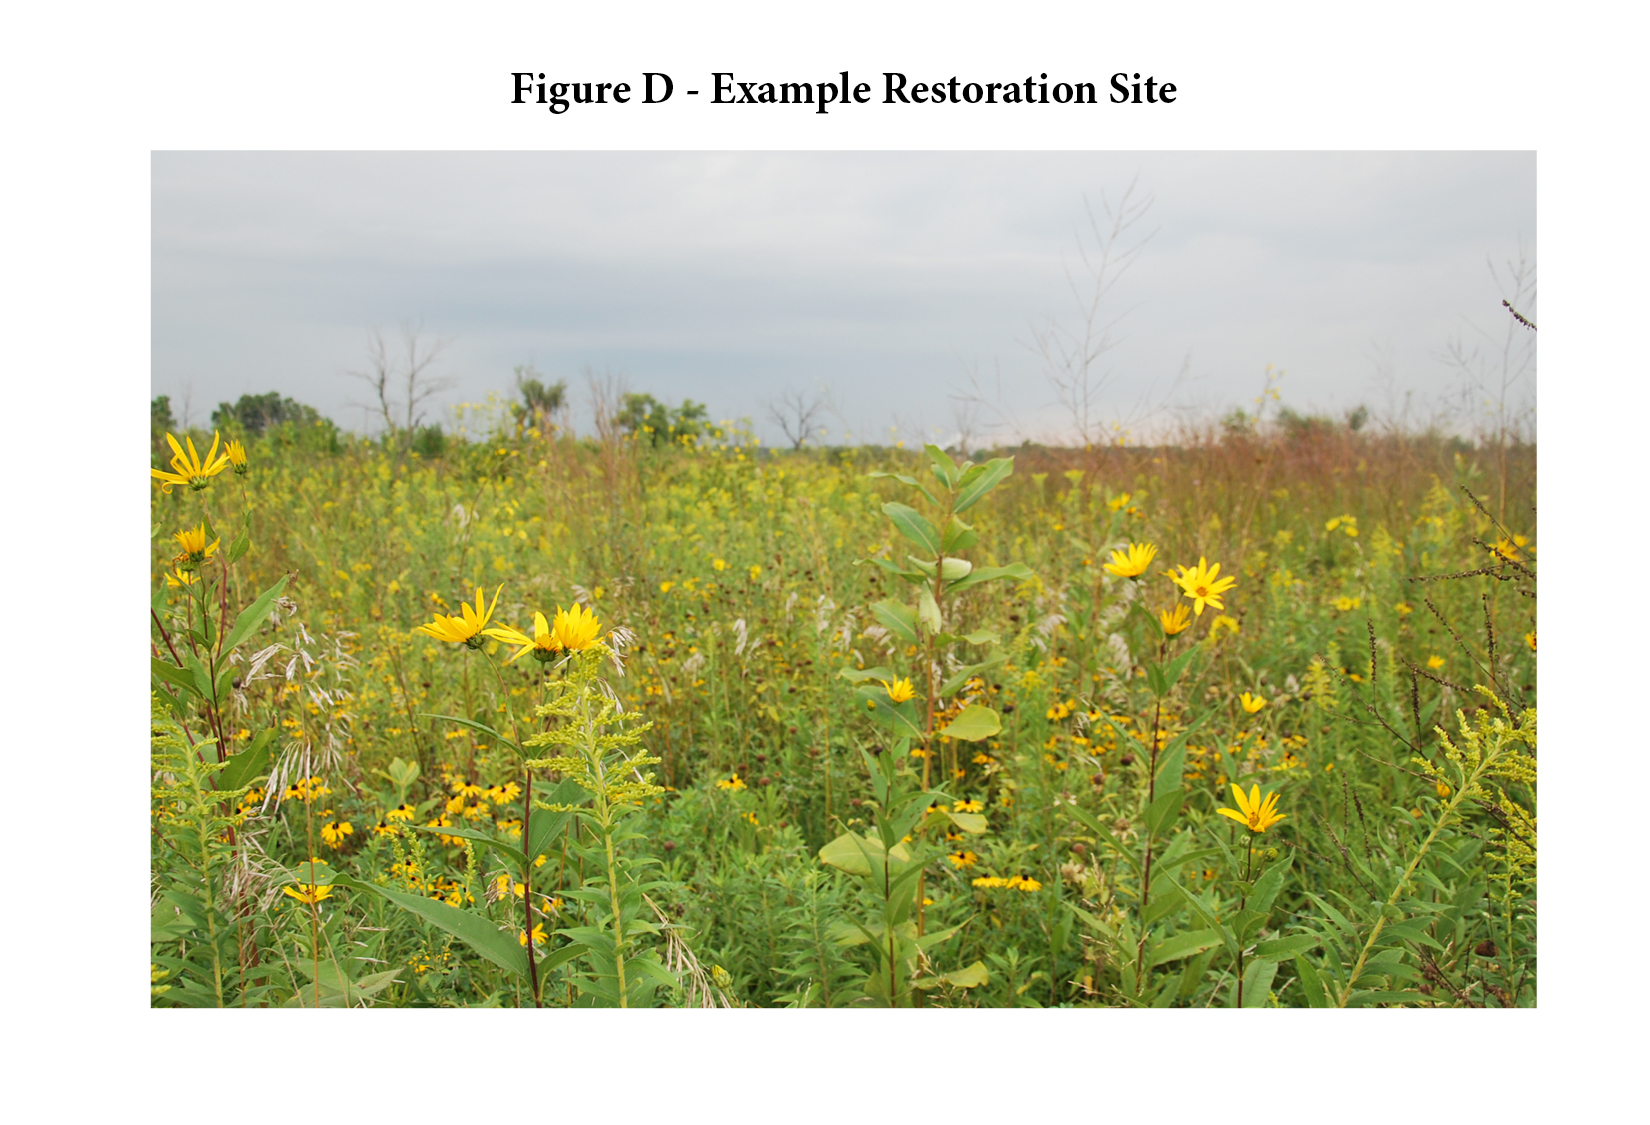 A restored prairie. A variety of species are identifiable, including milkweed, goldenrod, rudbeckia, rosinweed, brome grass, big bluestem grass, and more. An endless texture of diversity, regardless of the fact that it’s a restoration.